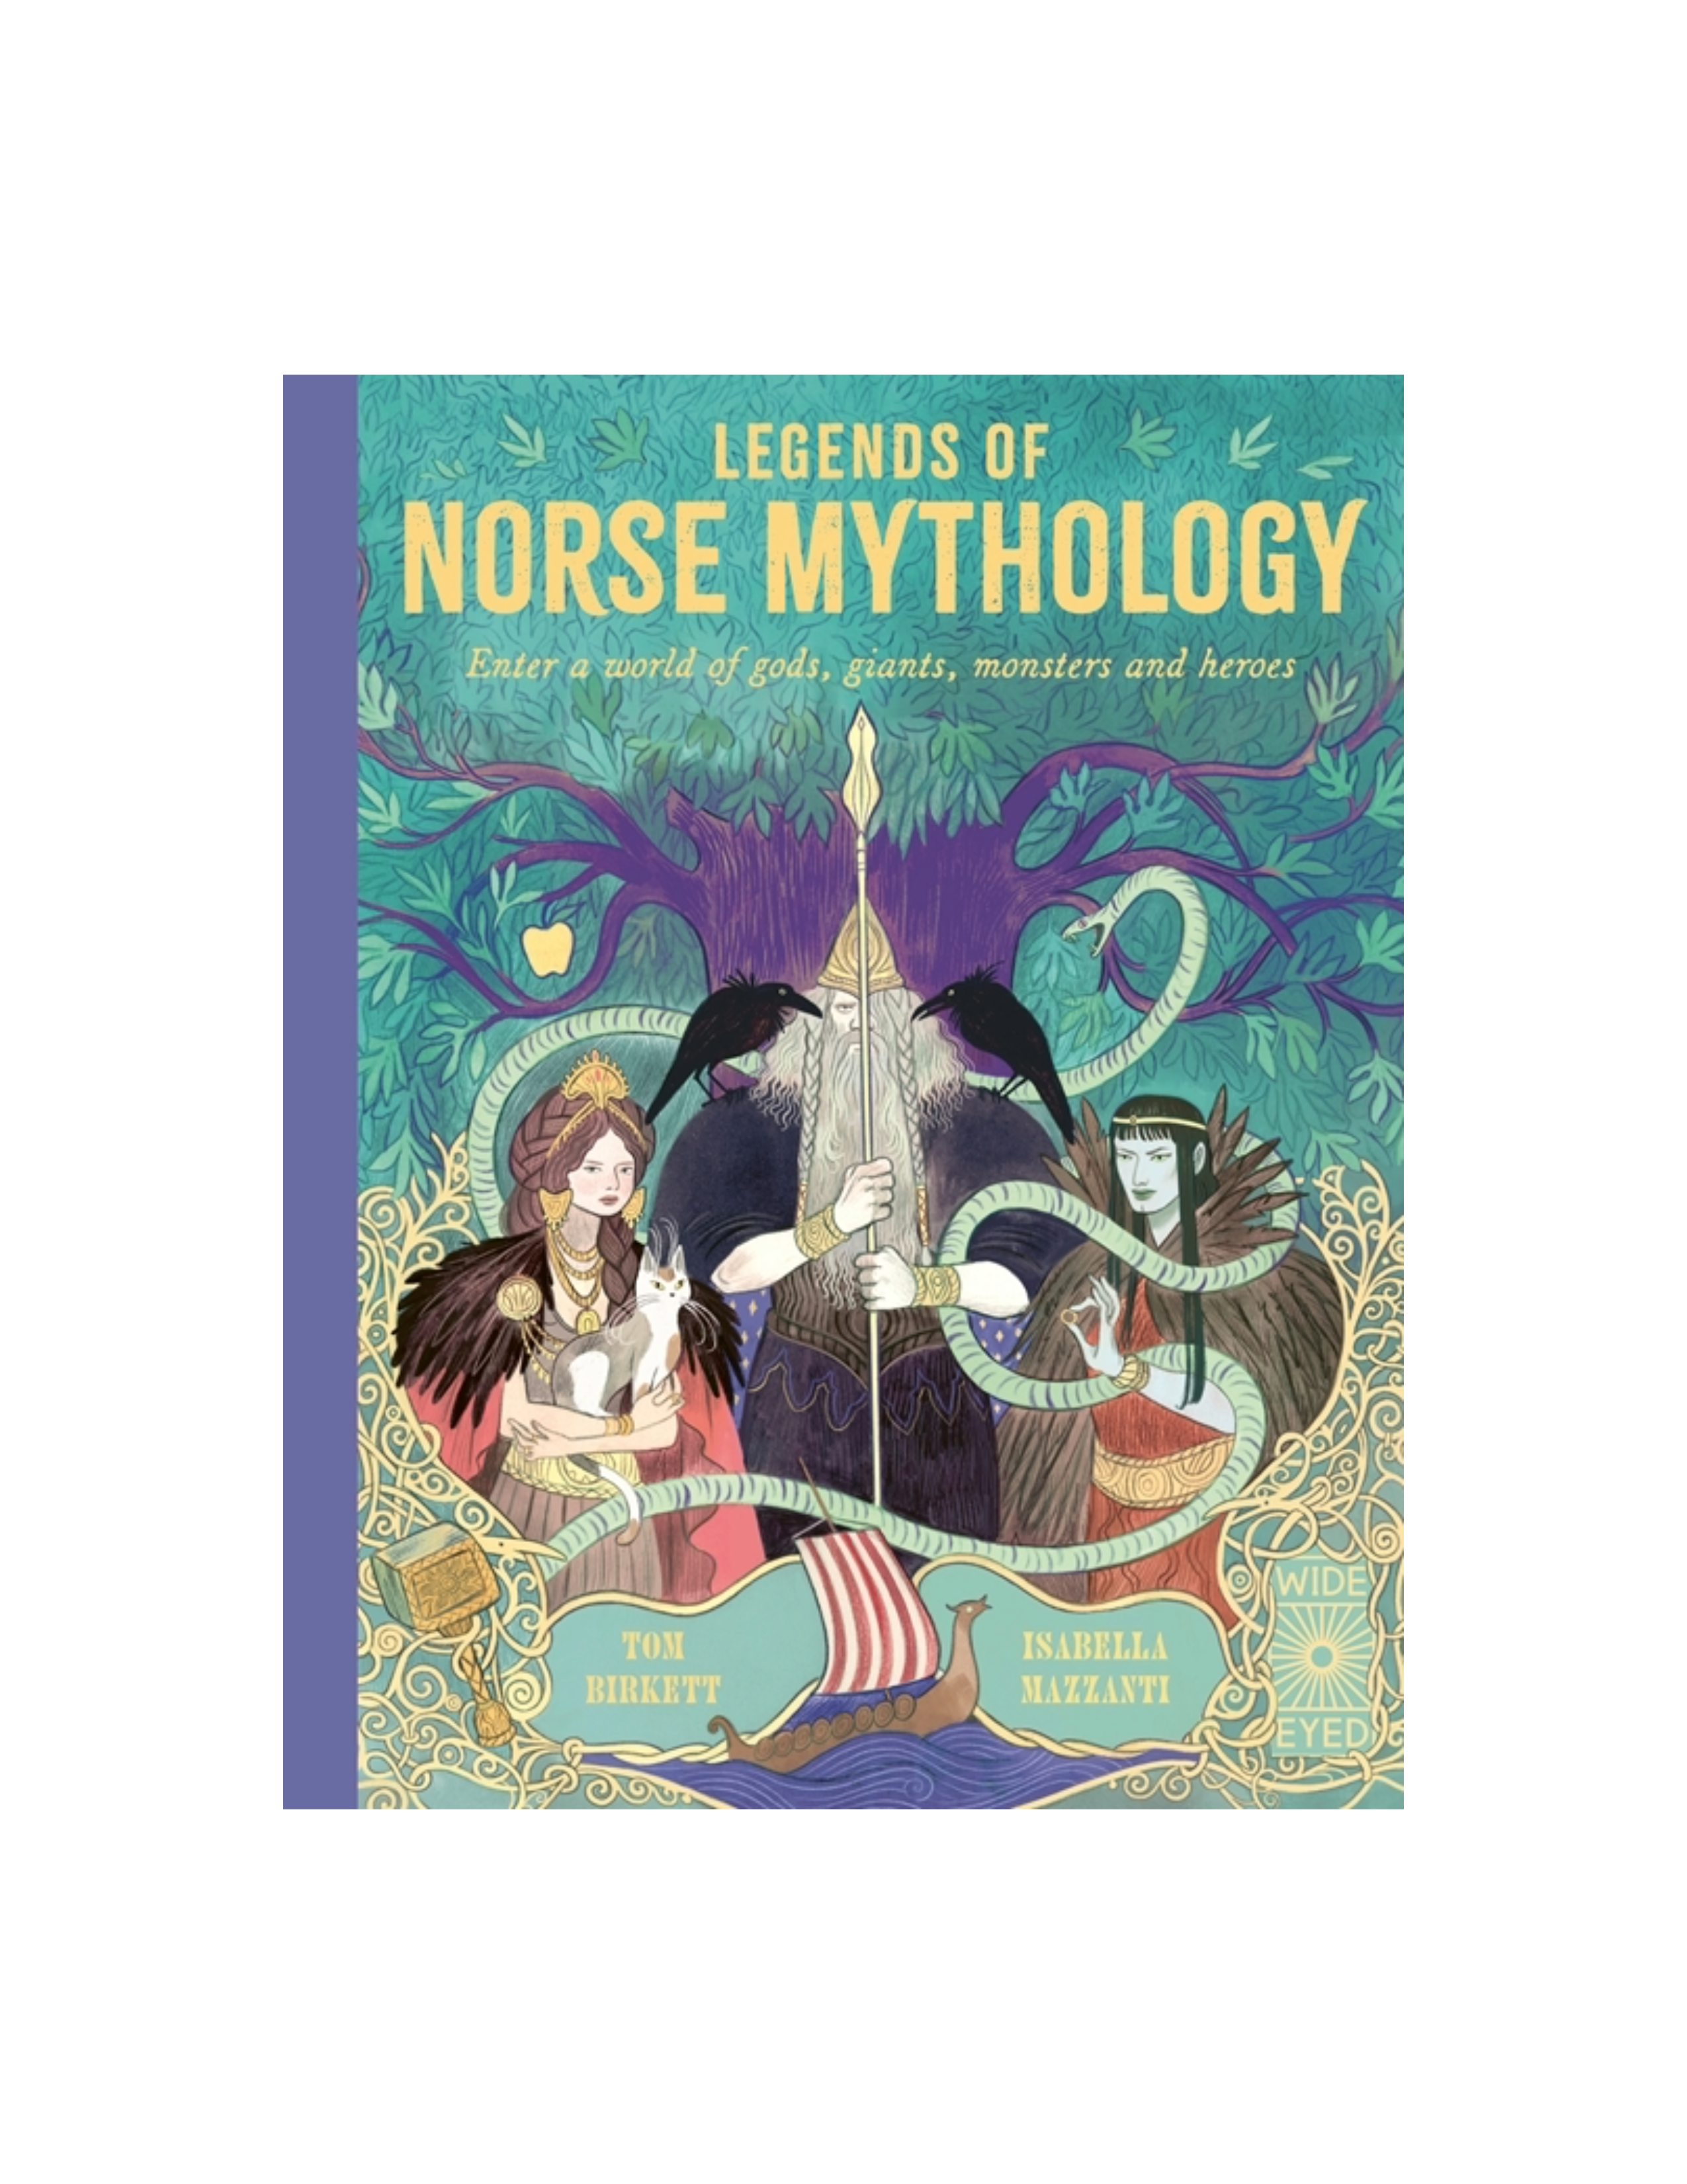 Legends of Norse Mythology: Enter a World of Gods, Giants, Monsters and Heroes